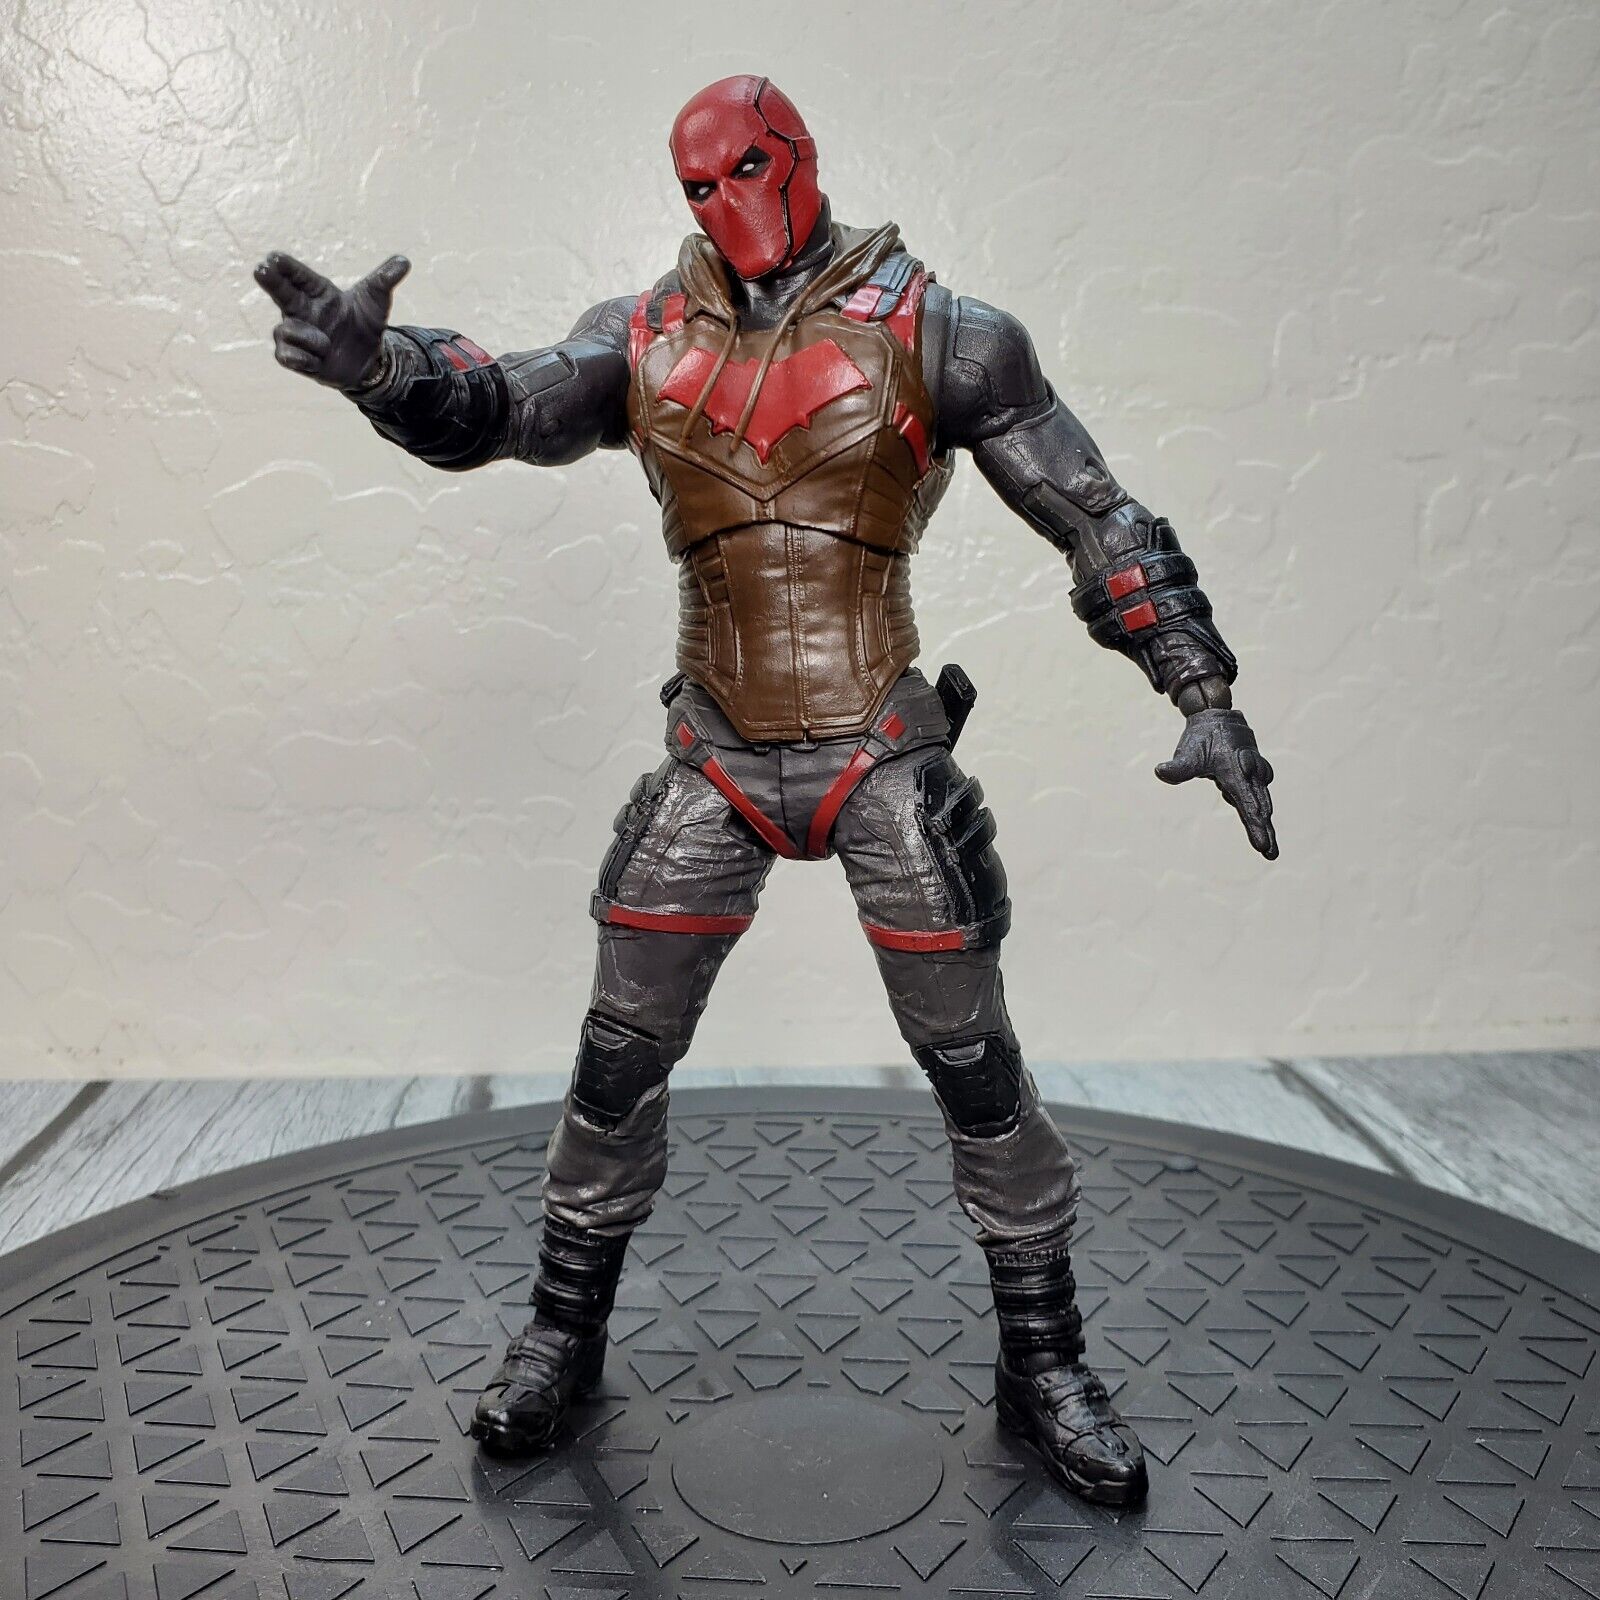 Adorable McFarlane DC Multiverse Red Hood Gotham Knights 7″ Action Figure 2021 Loose on eBay